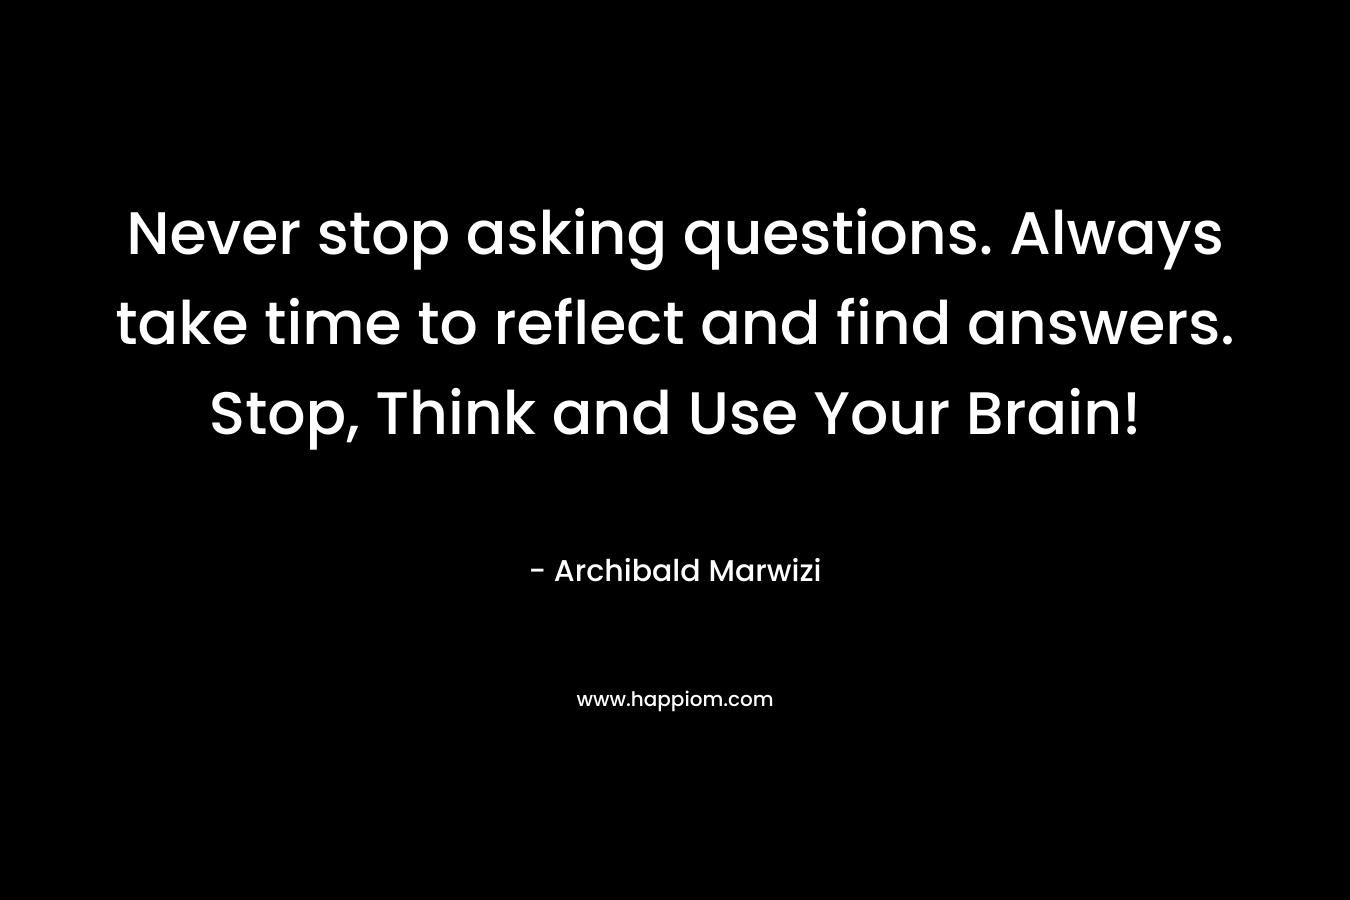 Never stop asking questions. Always take time to reflect and find answers. Stop, Think and Use Your Brain!